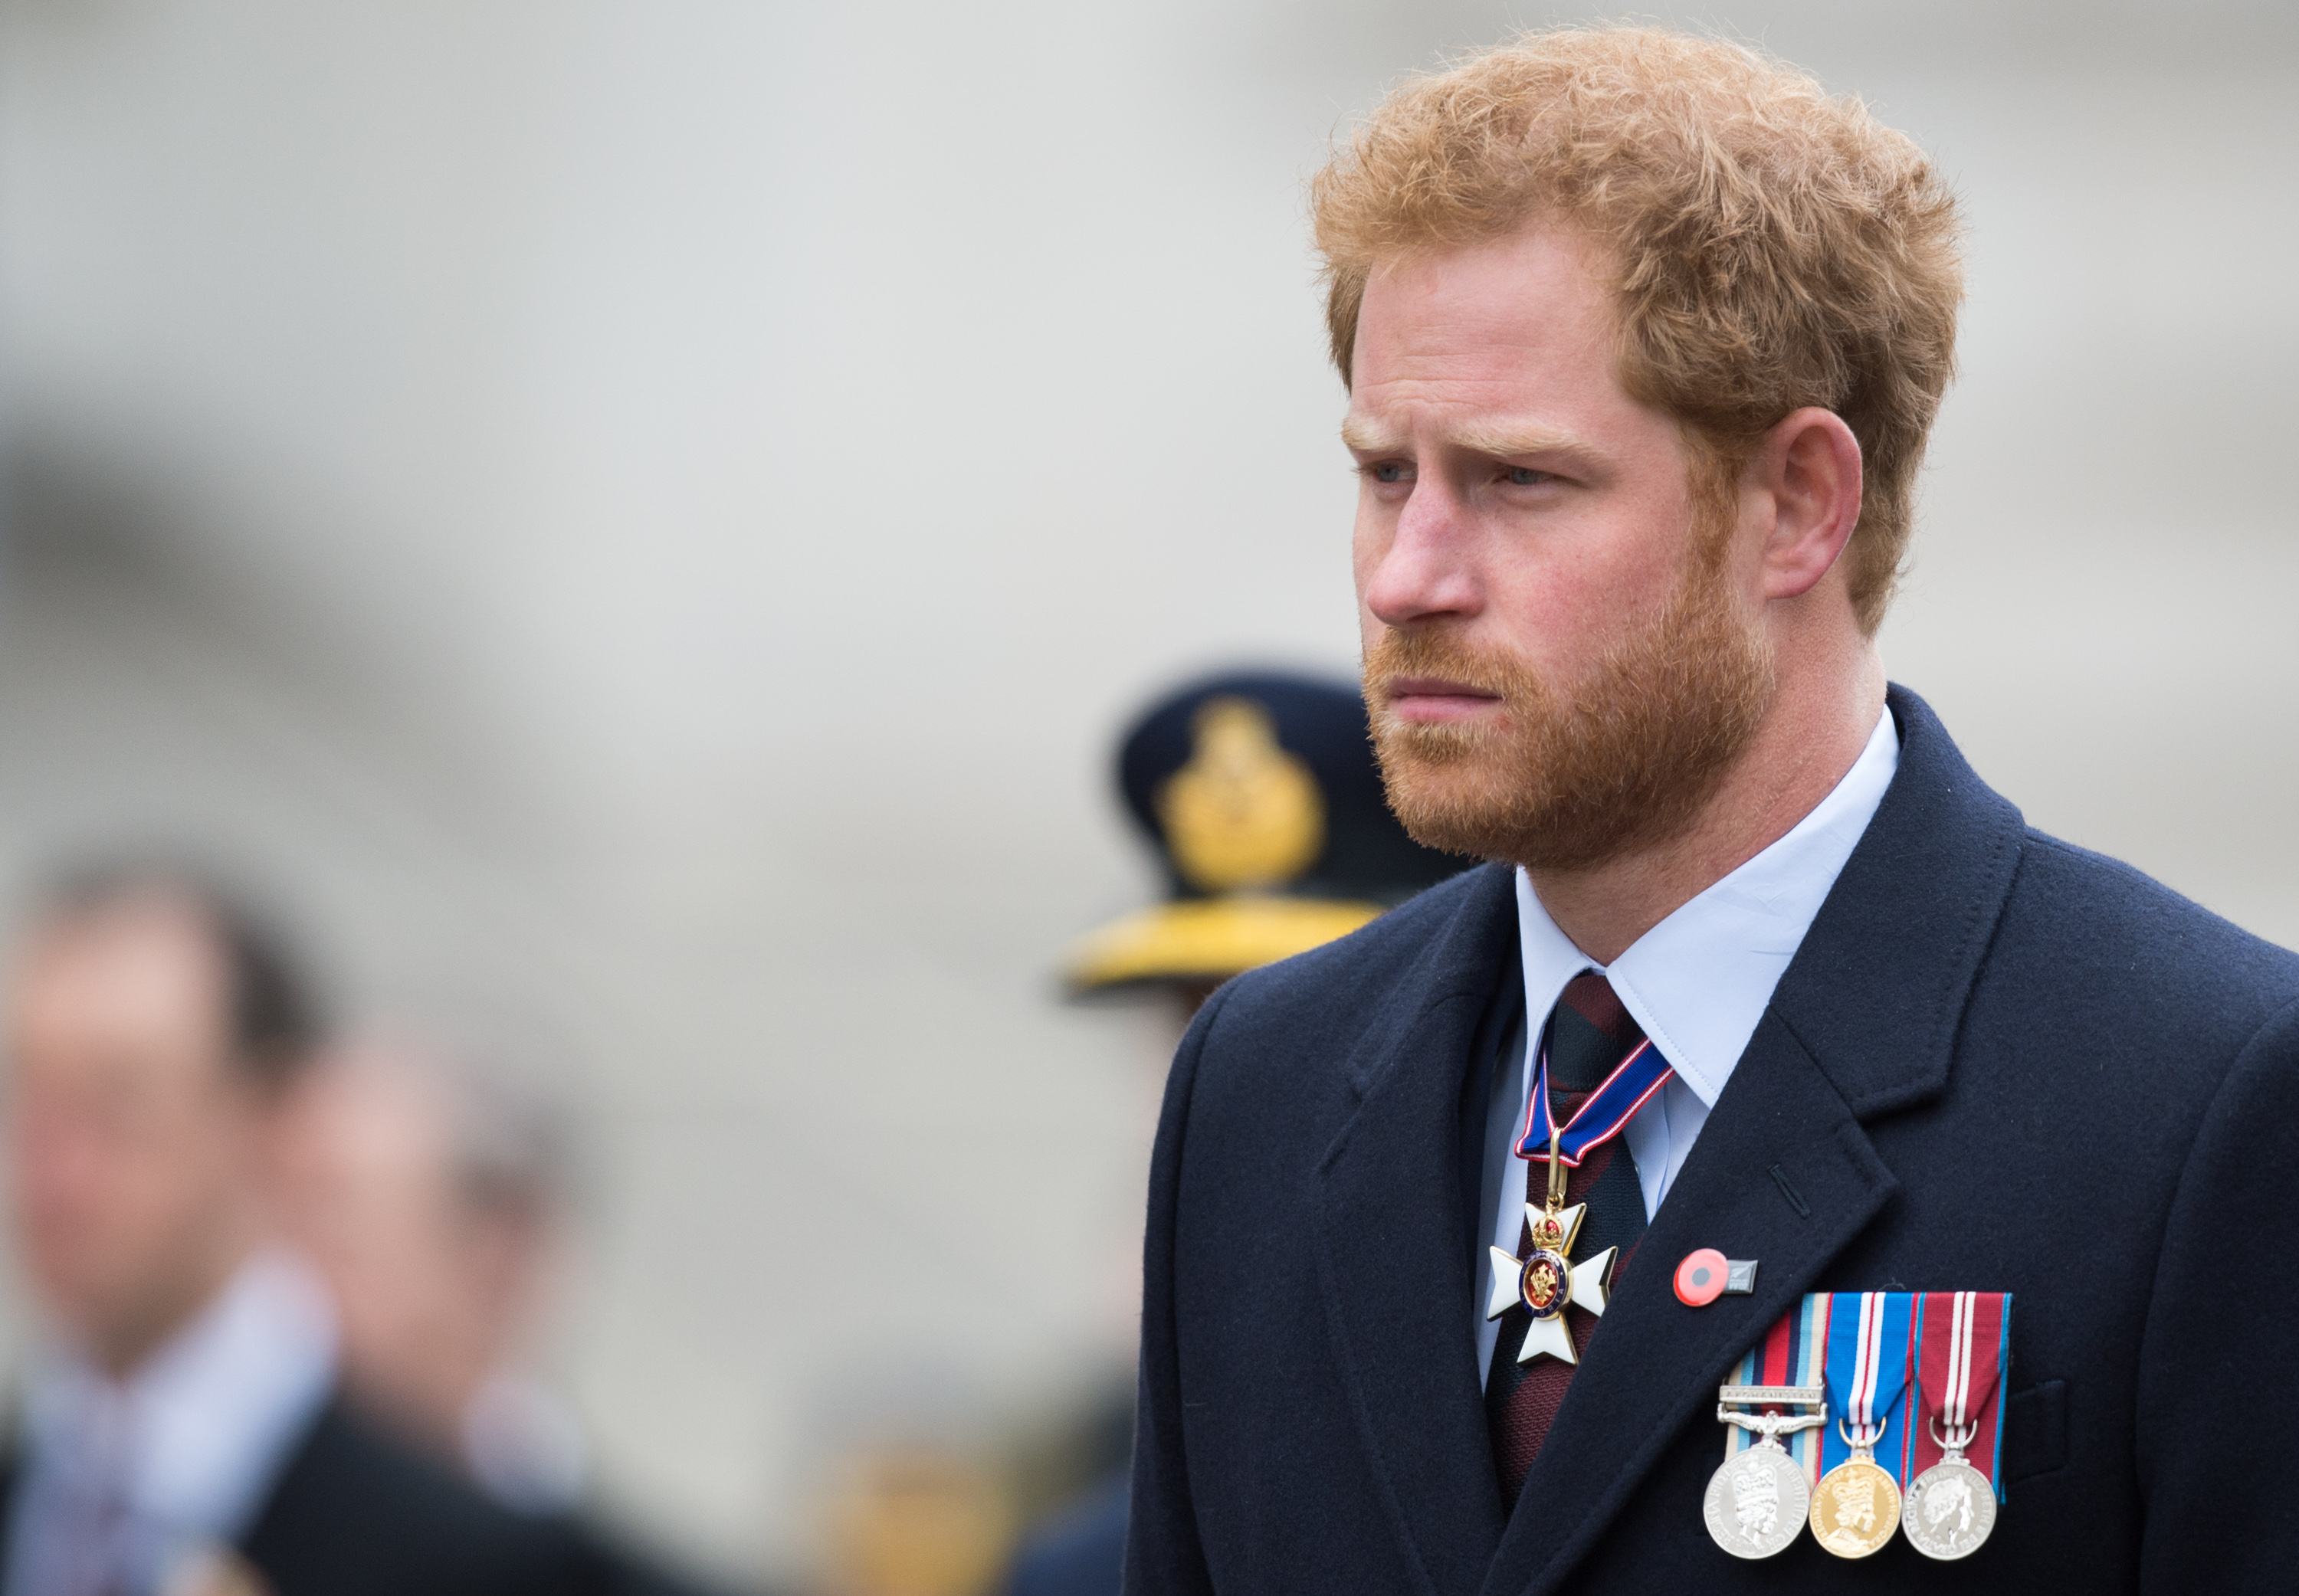 Prince Harry attends the ANZAC Service at The Cenotaph on April 25, 2016, in London, England. | Source: Getty Images